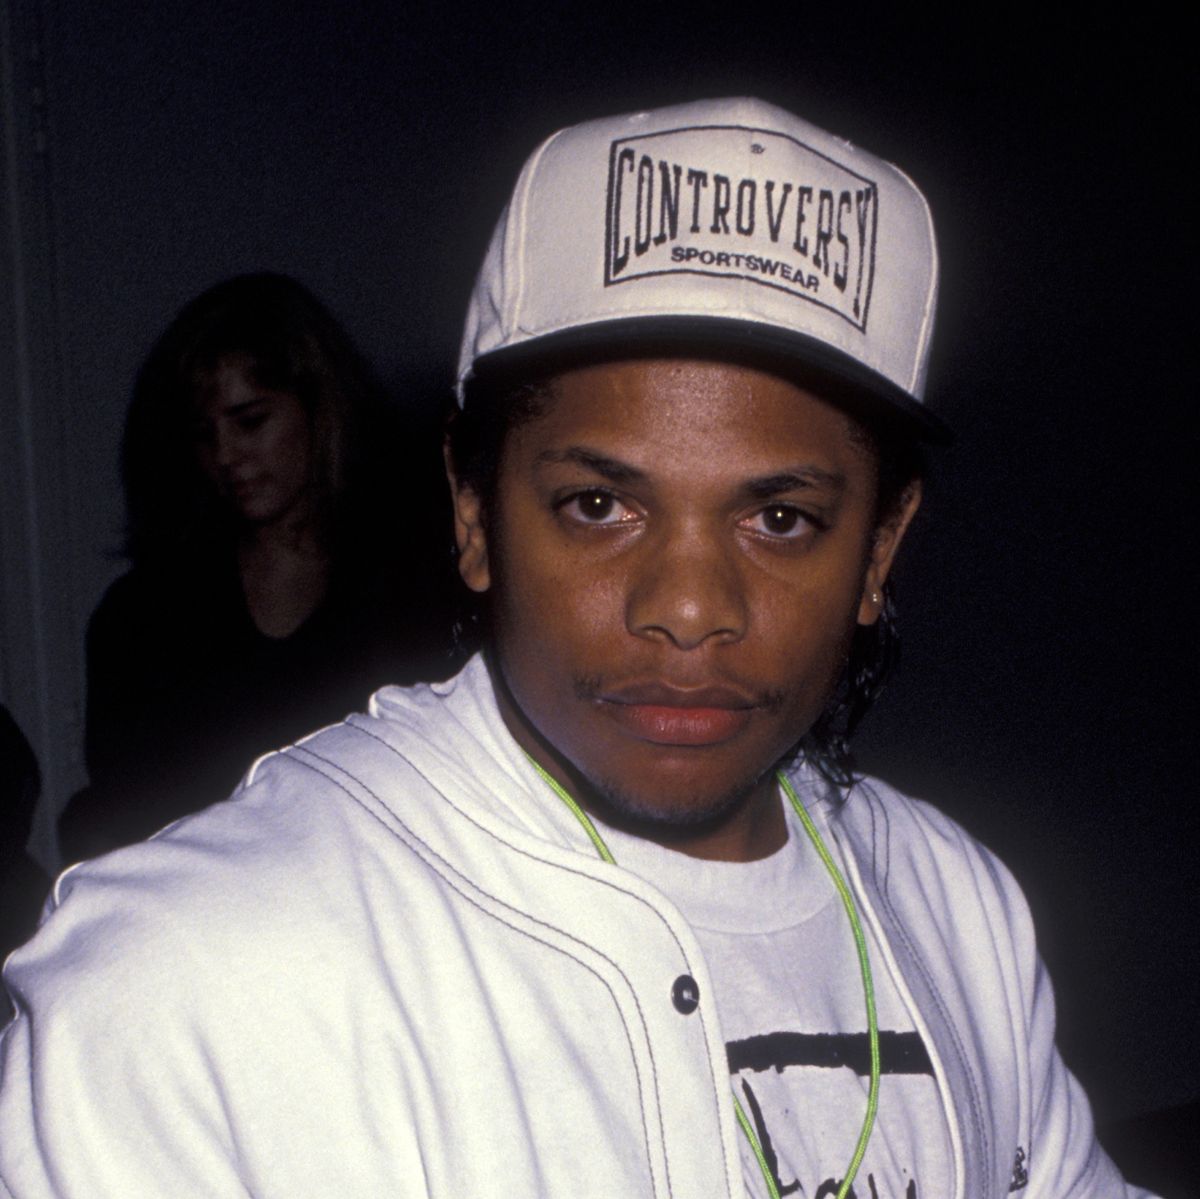 Ron Galella Archive - File Photos 2011Eazy-E of N.W.A. attends Los Angeles Music Awards on February 19, 1992 at the Santa Monica Civic Auditorium in Santa Monica, California. (Photo by Ron Galella, Ltd./Ron Galella Collection via Getty Images)